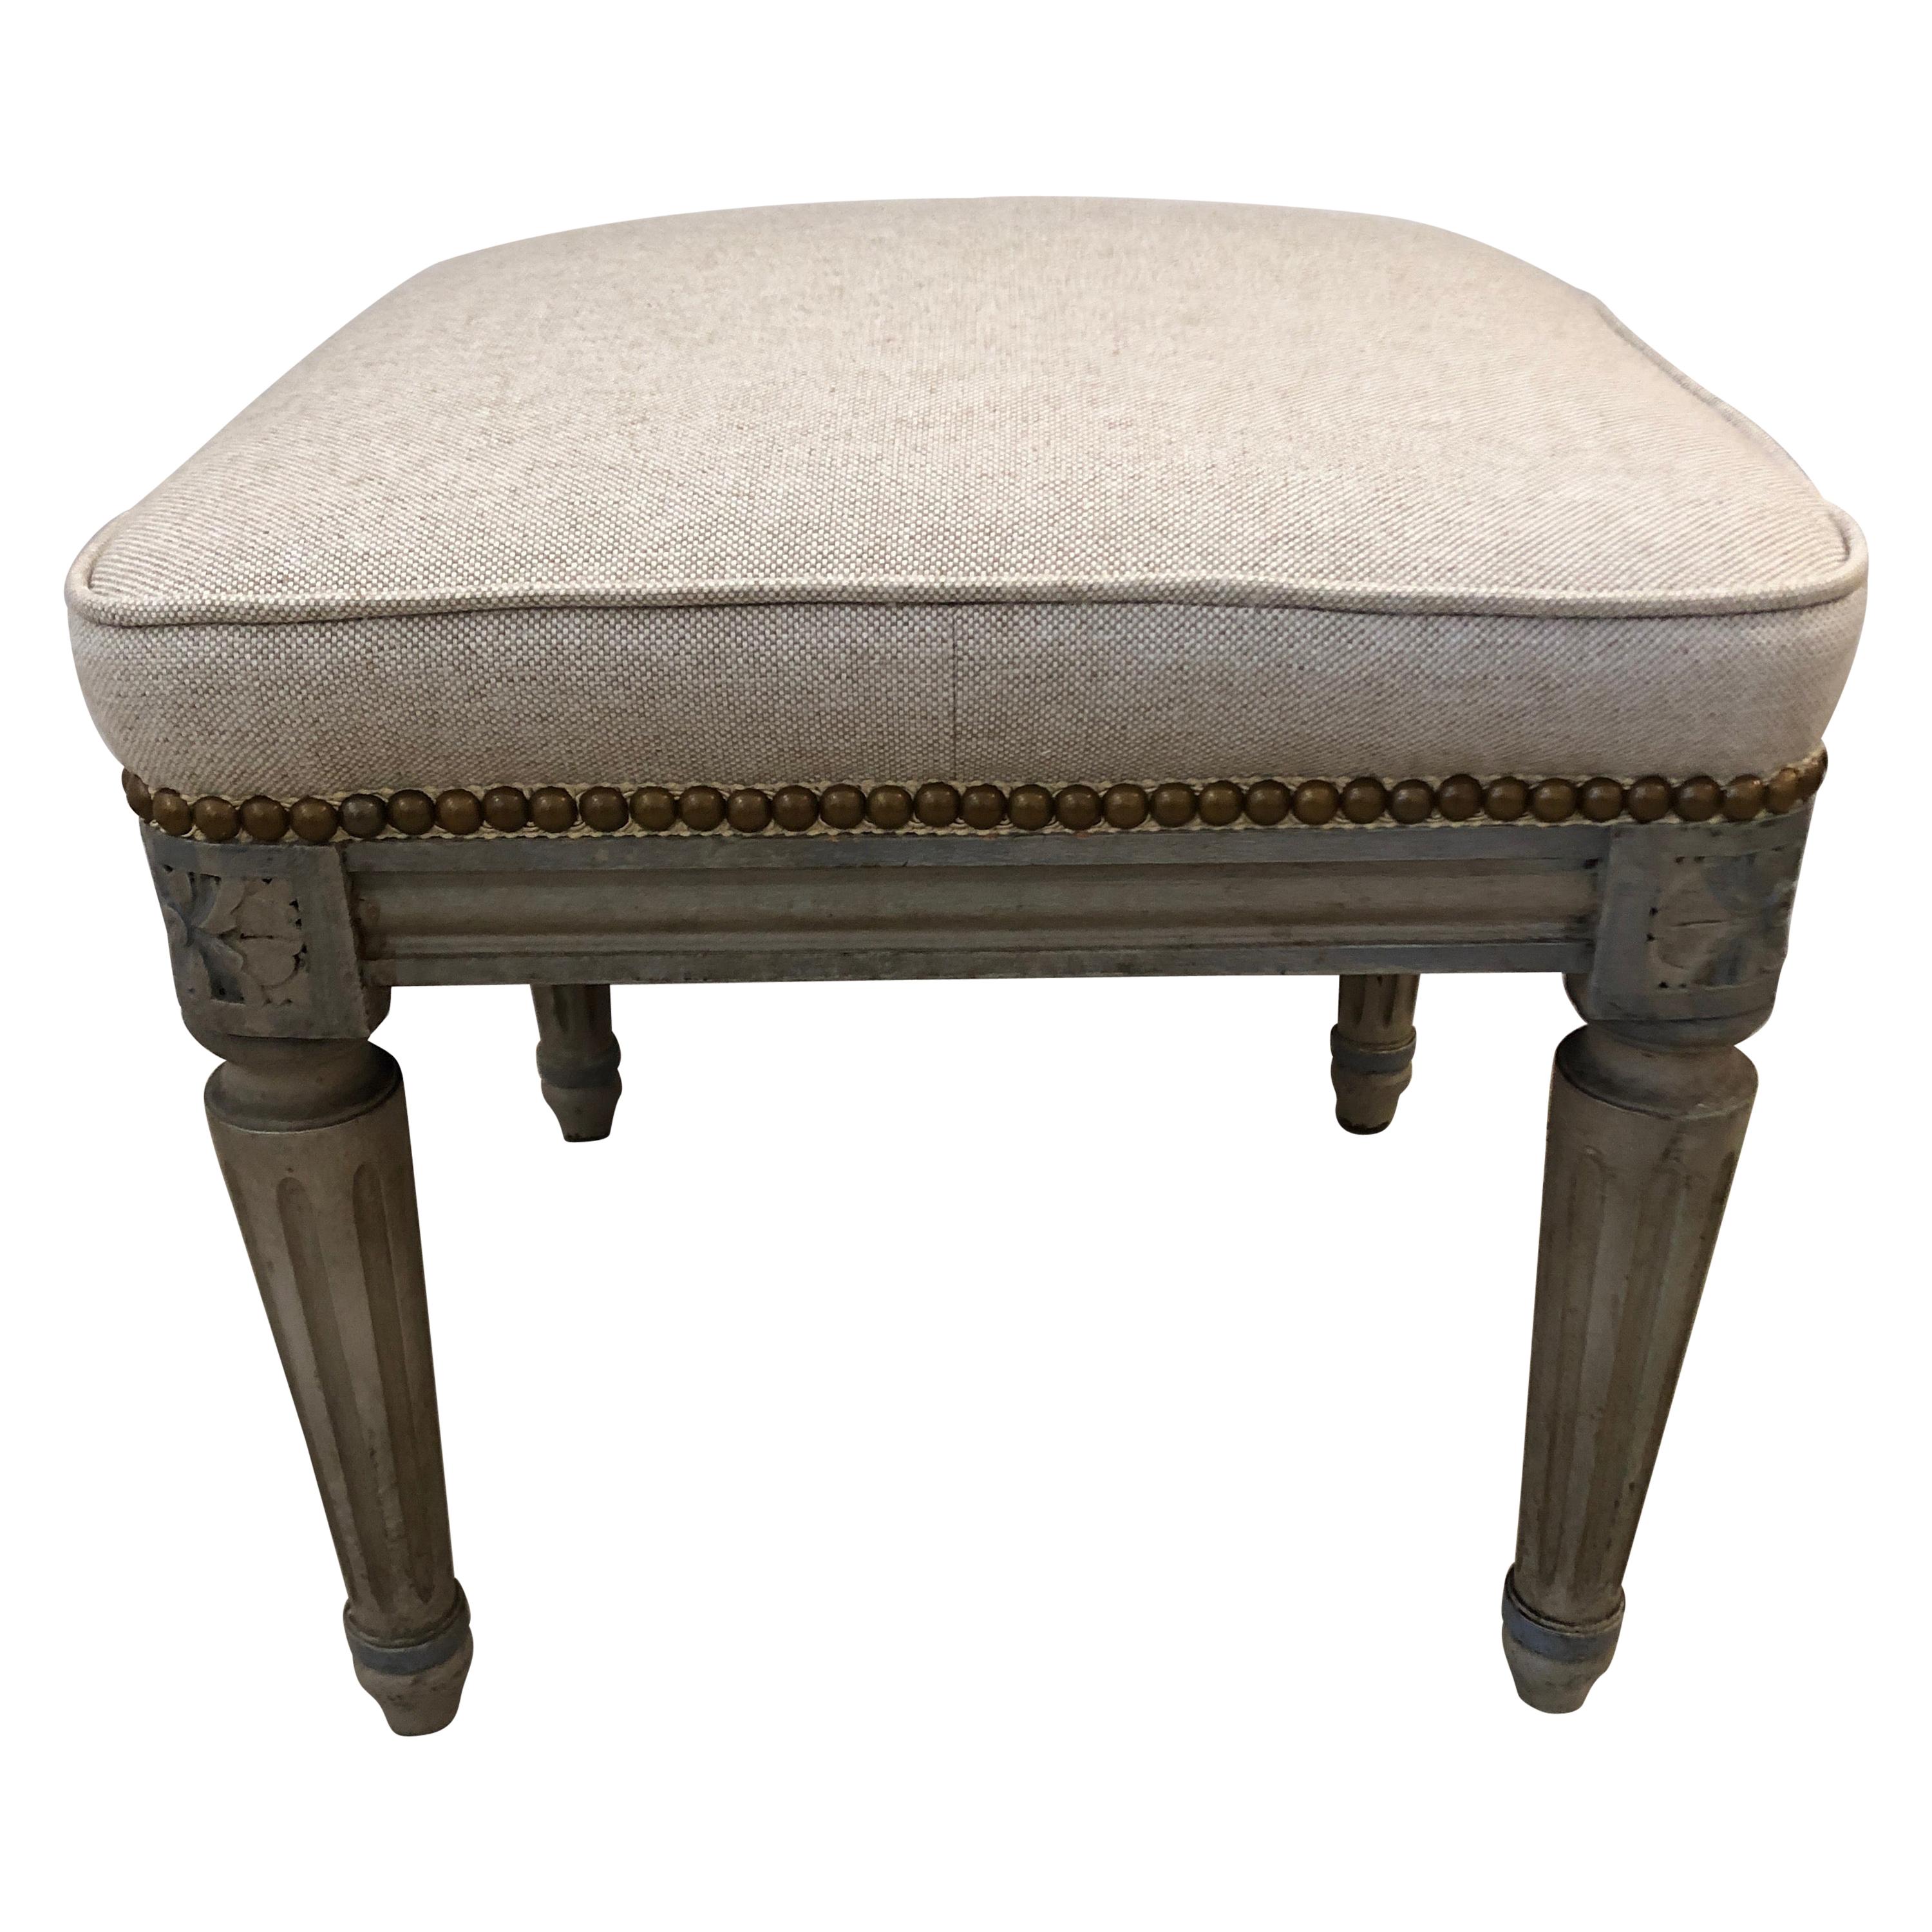 Very Pretty French Louis XVI Painted Ottoman Stool with New Upholstery